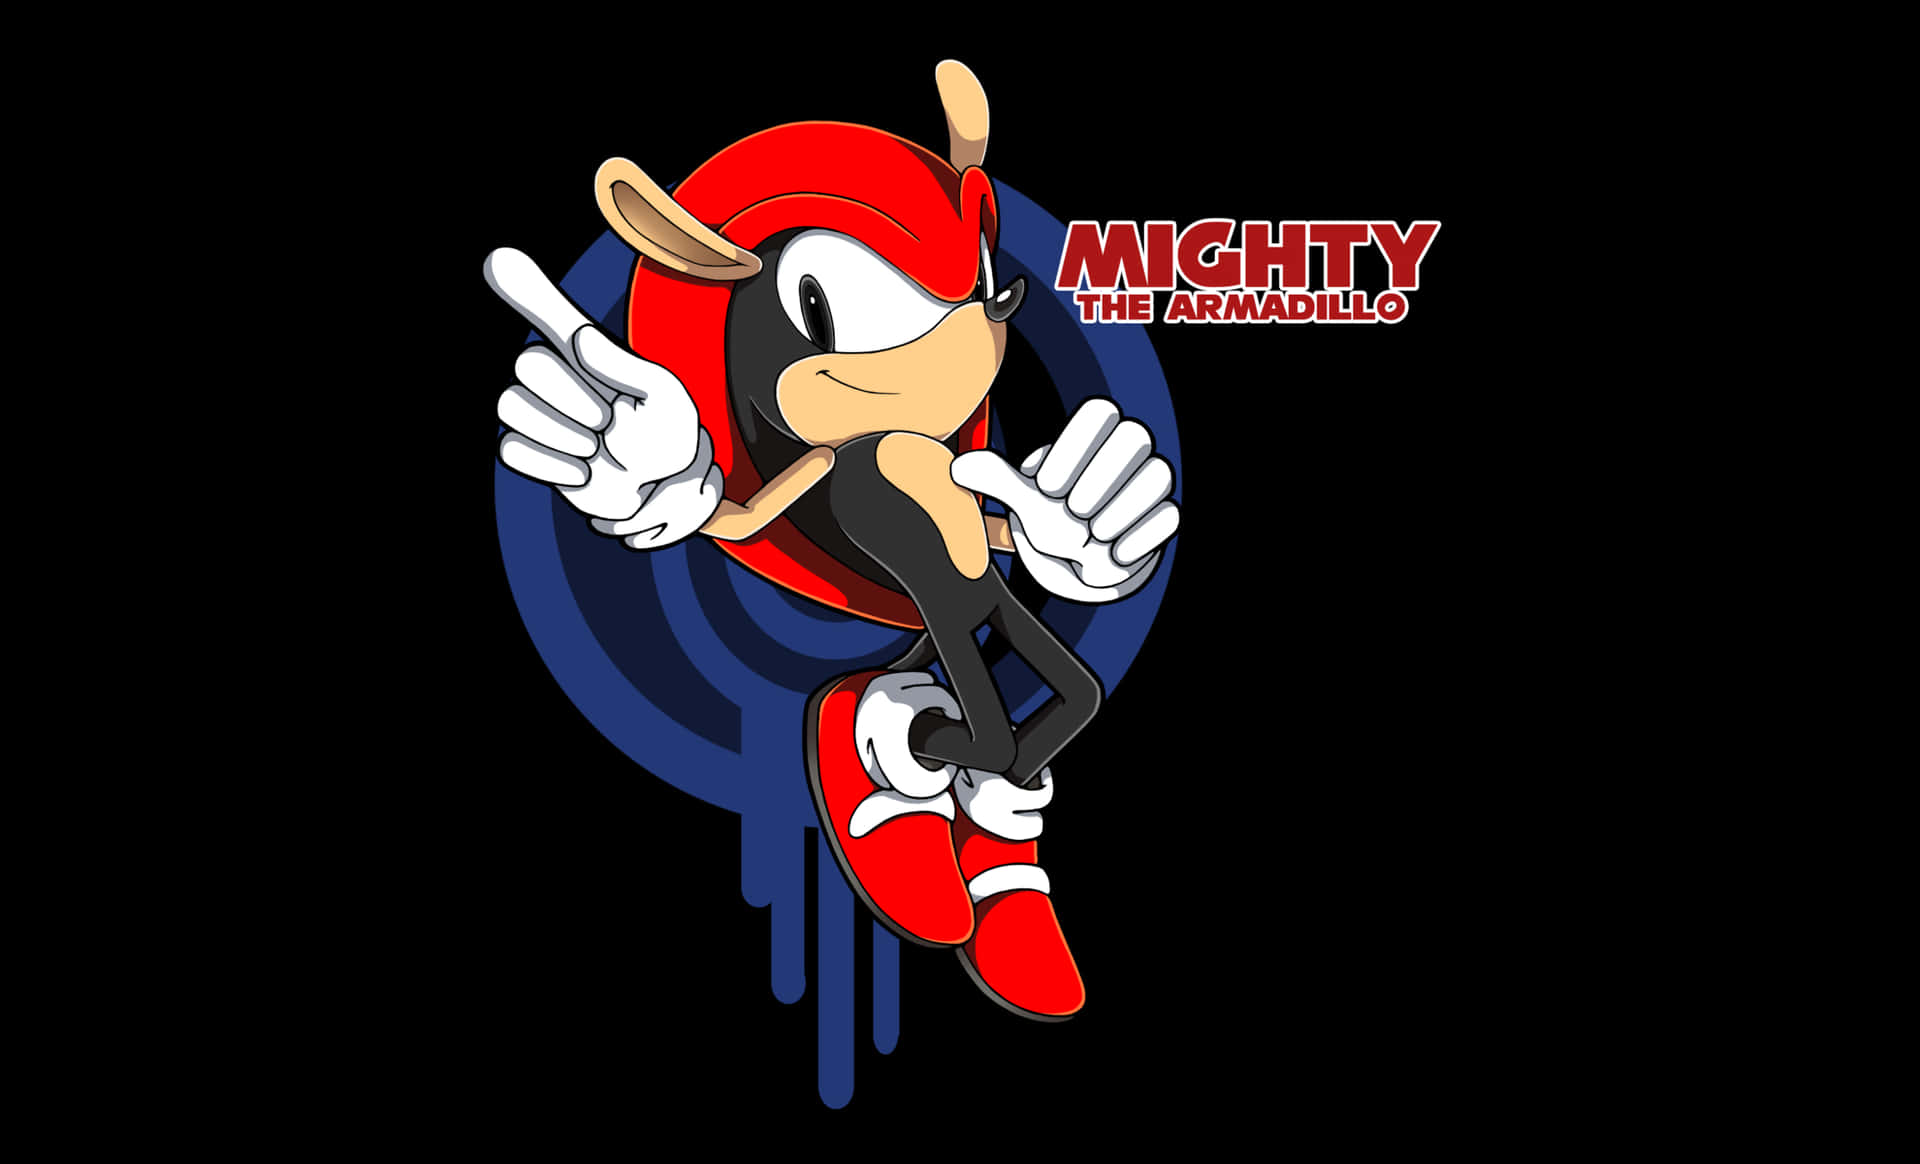 100+] Mighty The Armadillo Wallpapers